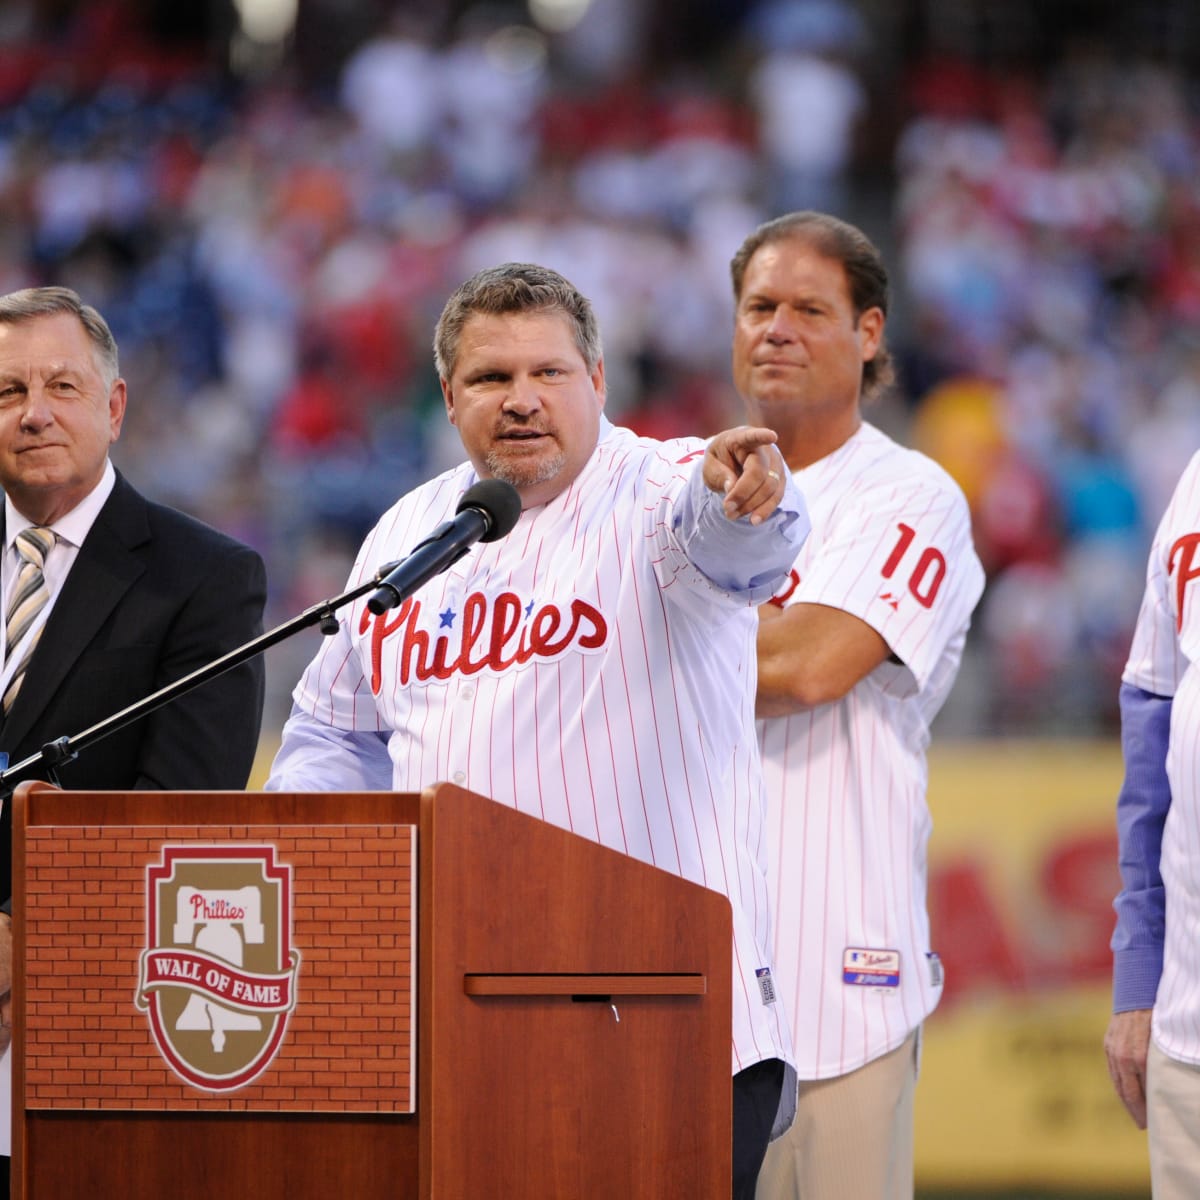 John Kruk: From Phillies Fan Favorite to Beloved - Sports Illustrated Inside The Phillies